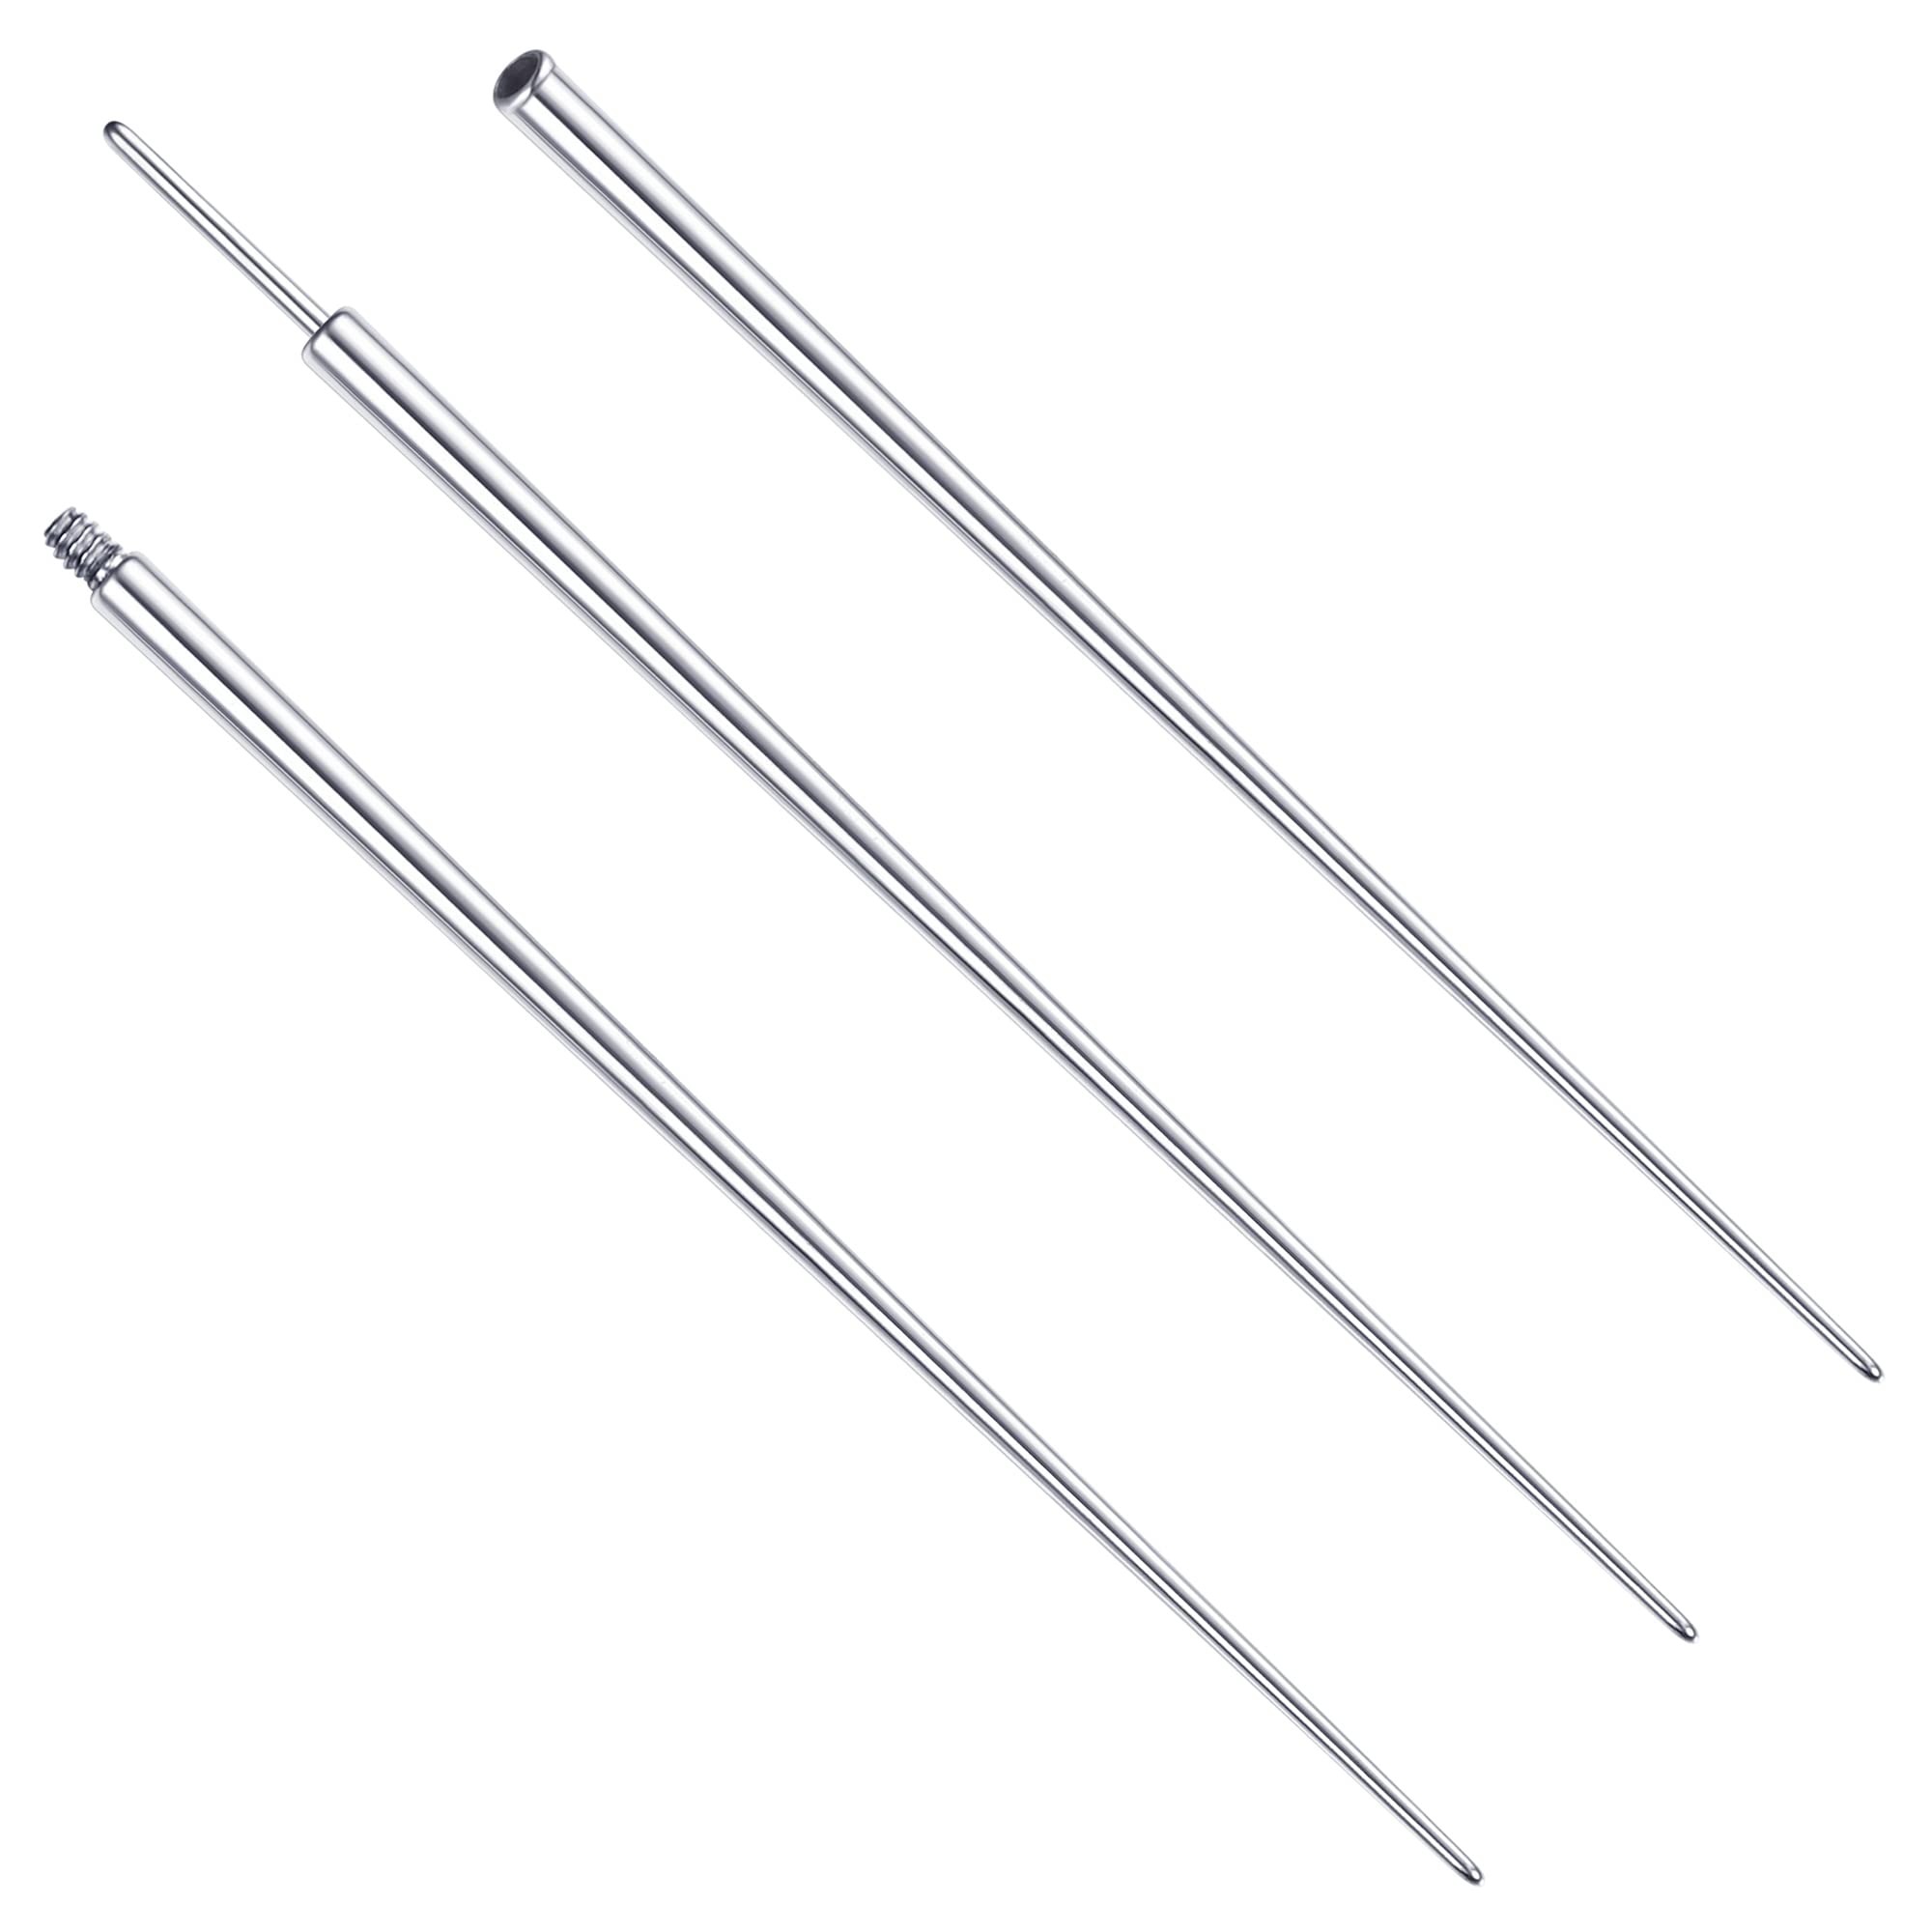 Insertion Pins for at Home Jewelry Changes Piercing Tools Piercing Tapers  Body Jewelry Tools Taper -  Australia